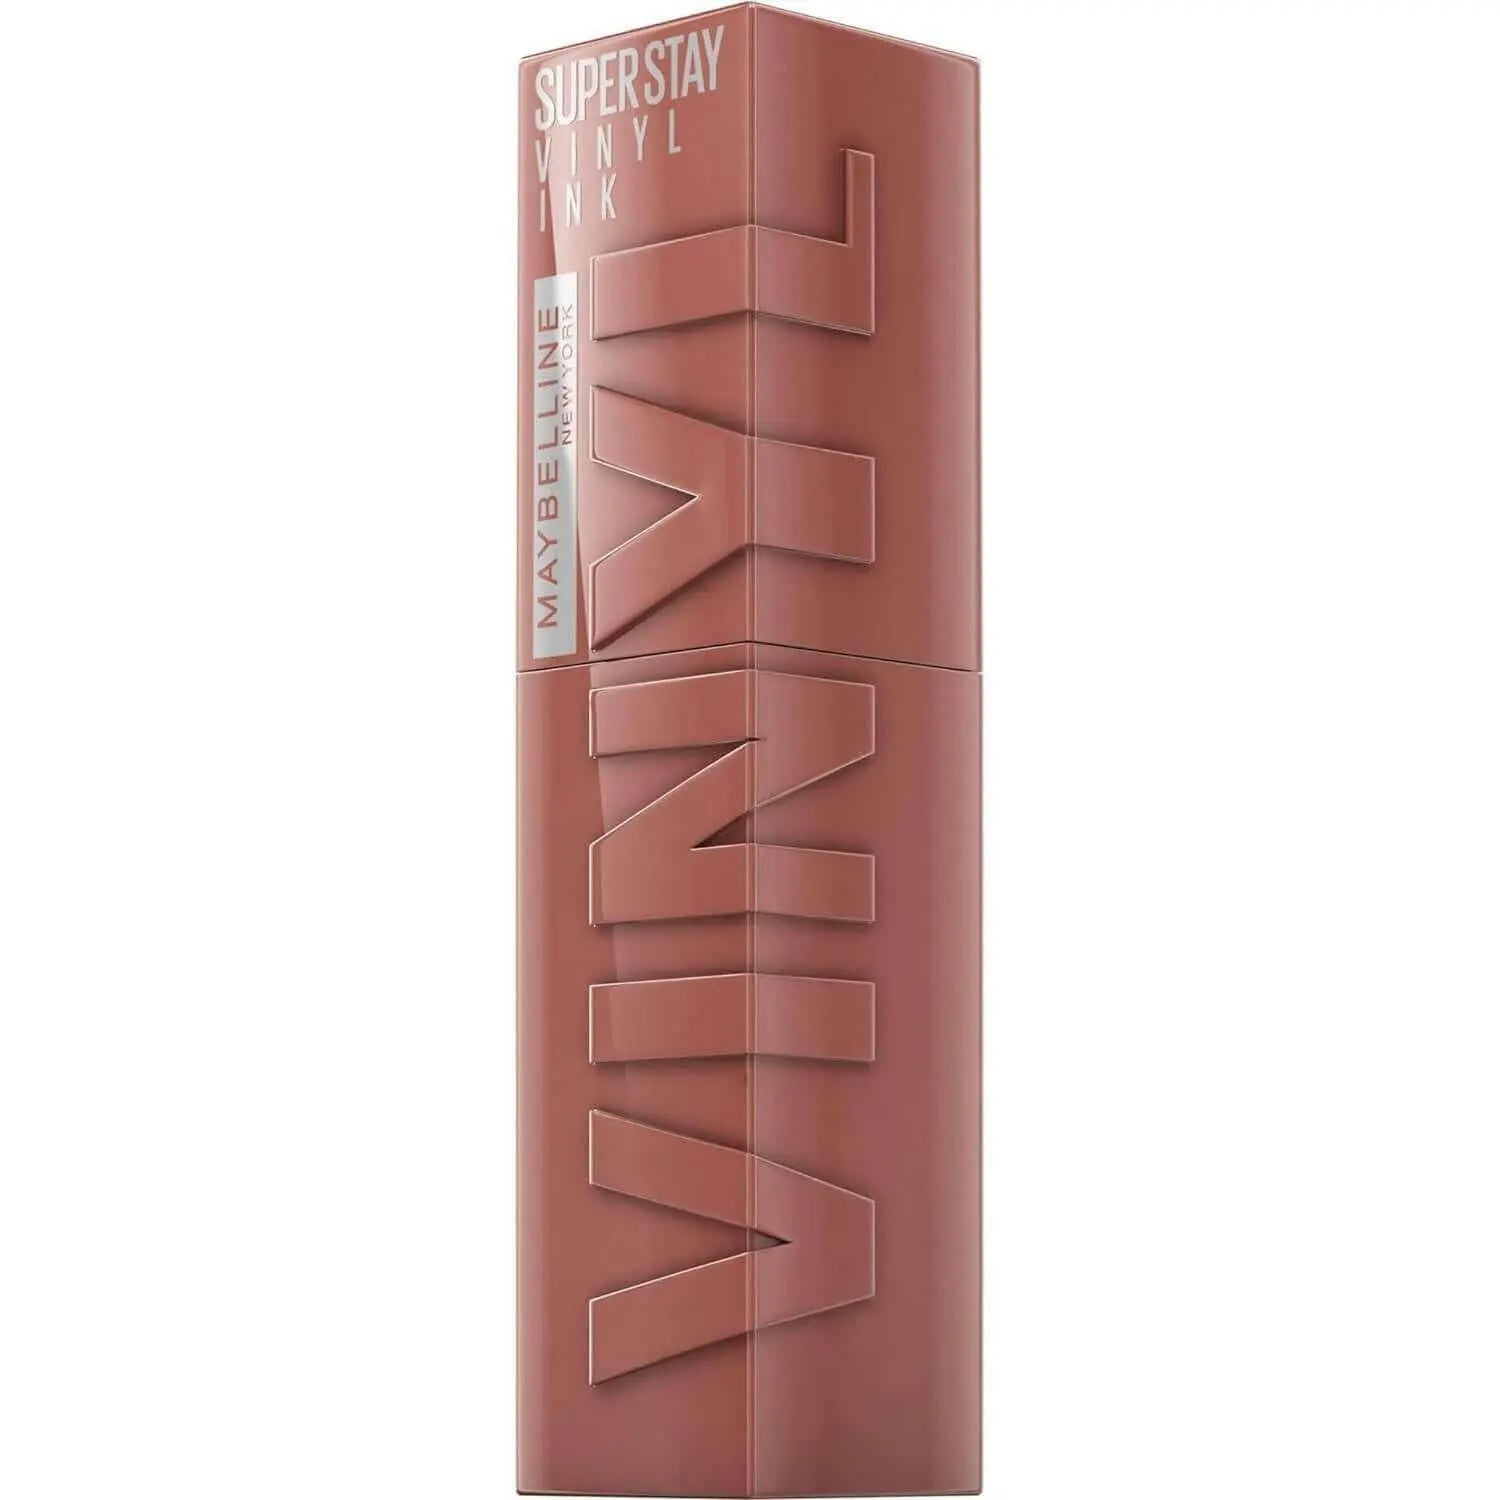 Maybelline New York Super Stay Vinyl Ink Nudes Long-wear Transfer Proof Gloss Lipstick, Punchy